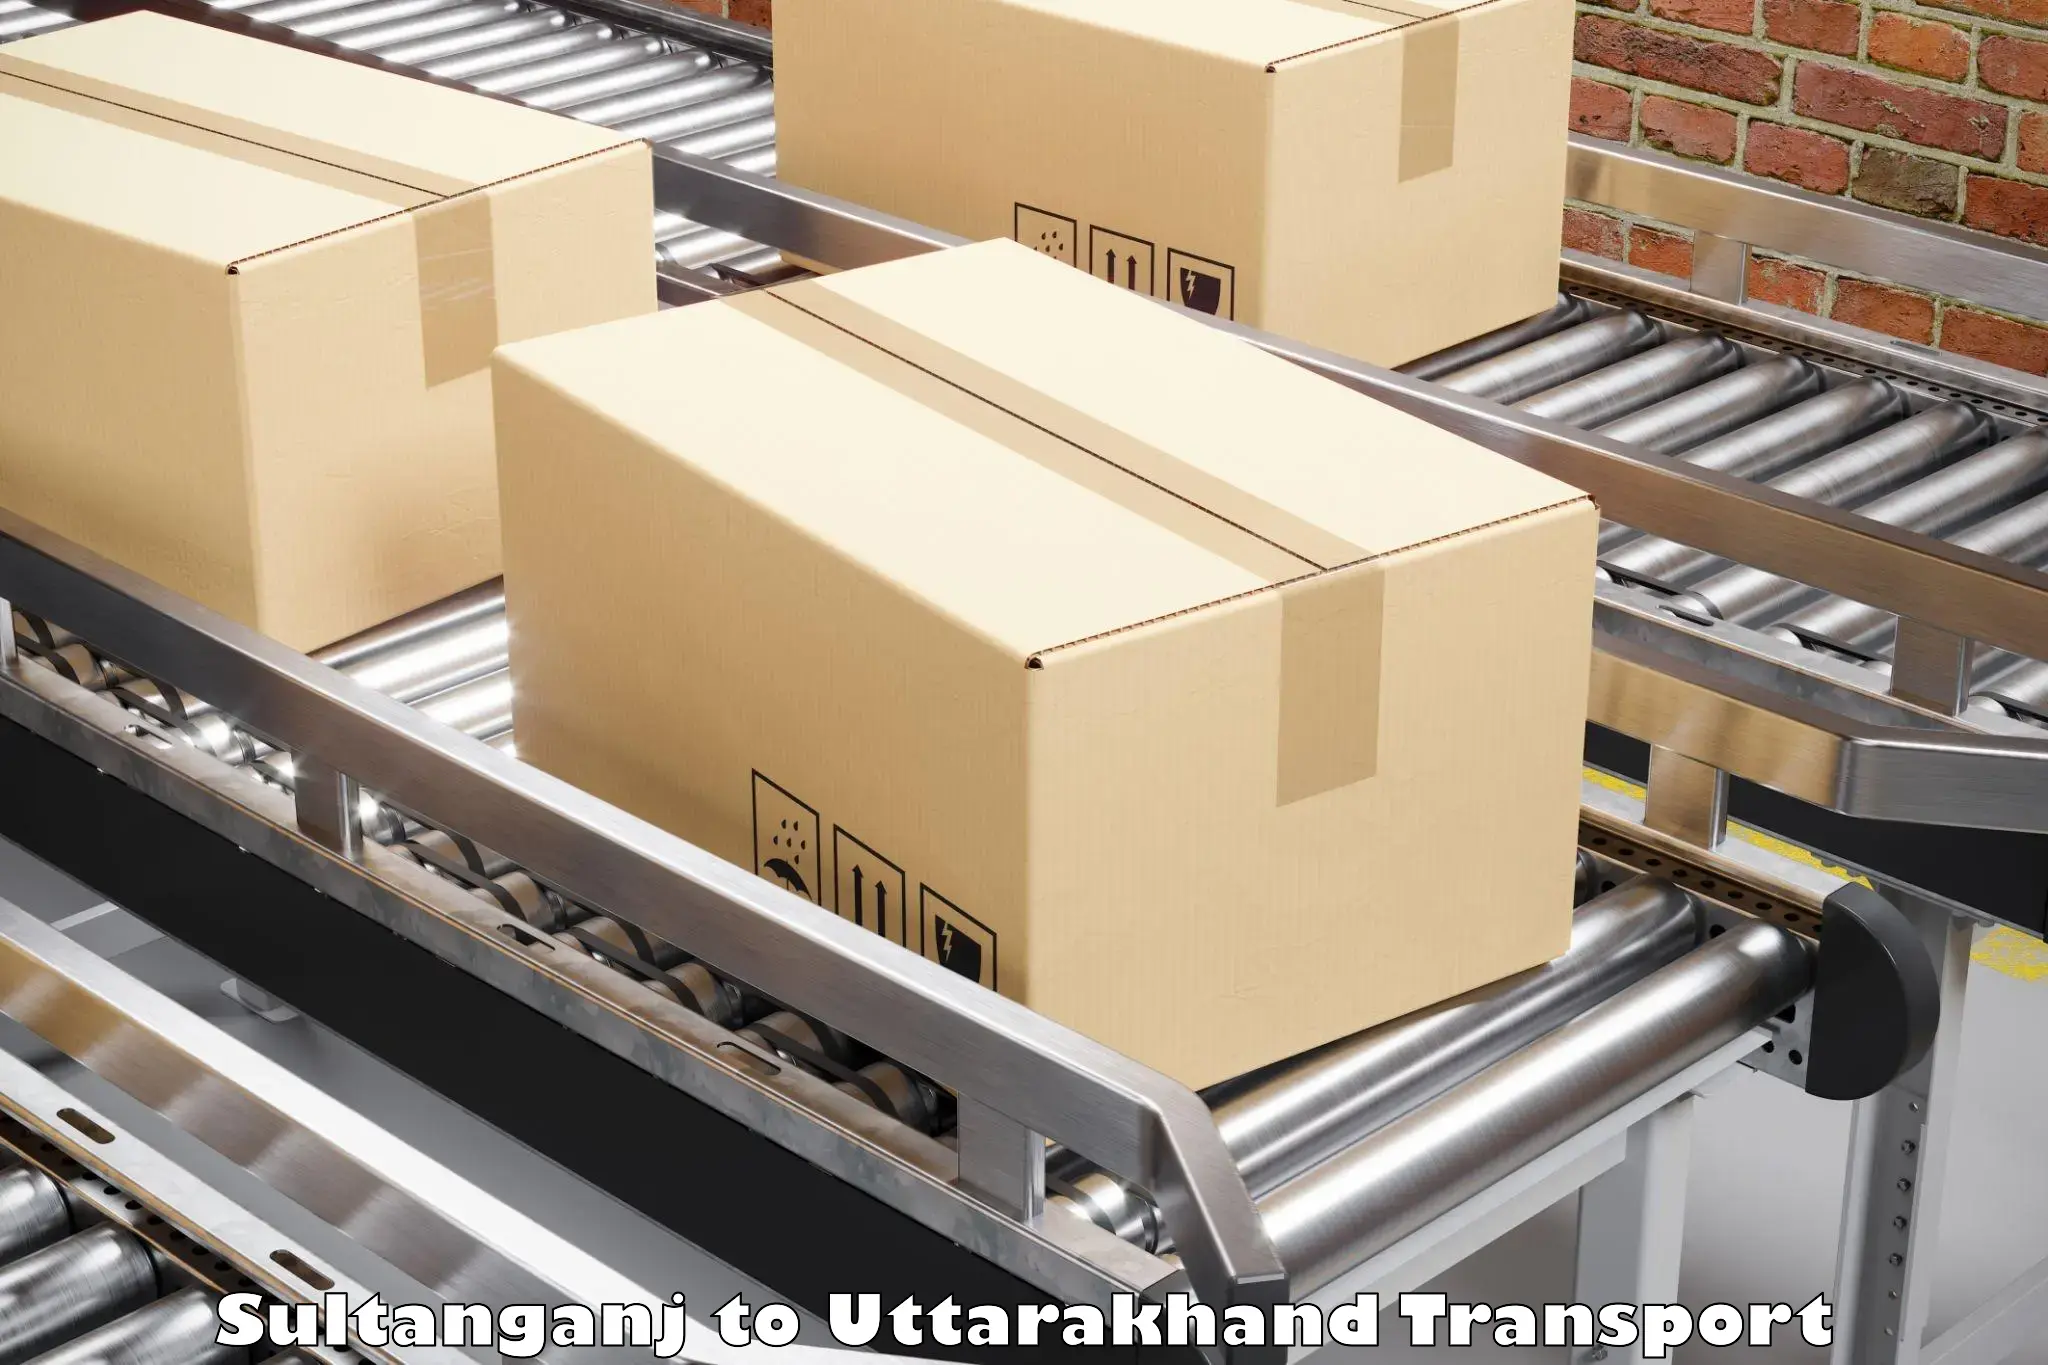 Container transport service Sultanganj to Pithoragarh